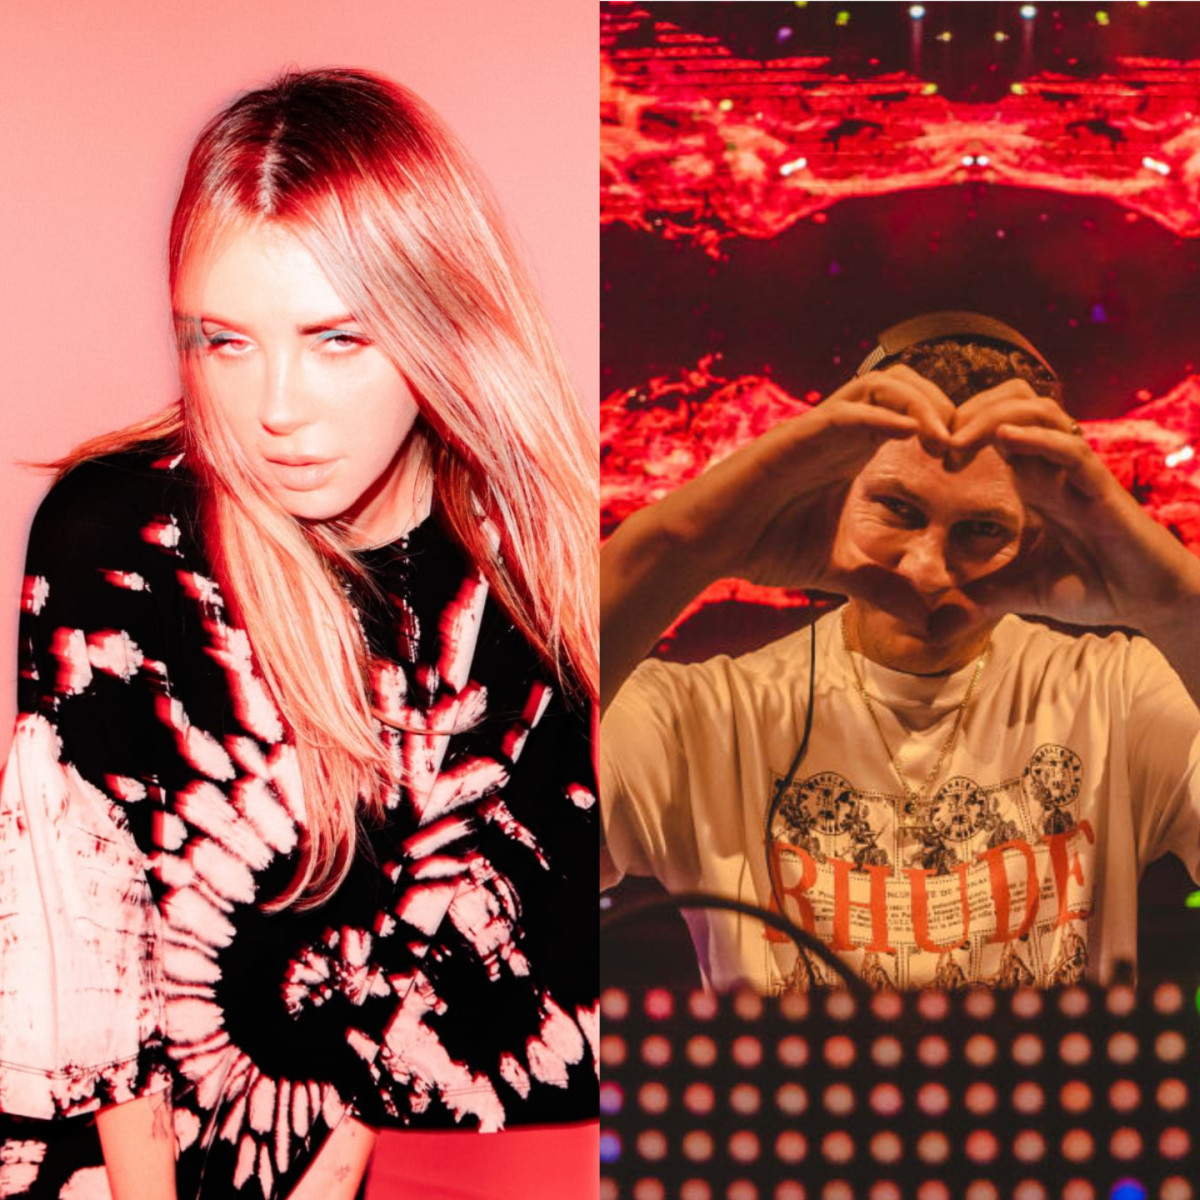 A Collaboration From Tiësto and Alison Wonderland May Be In the Works